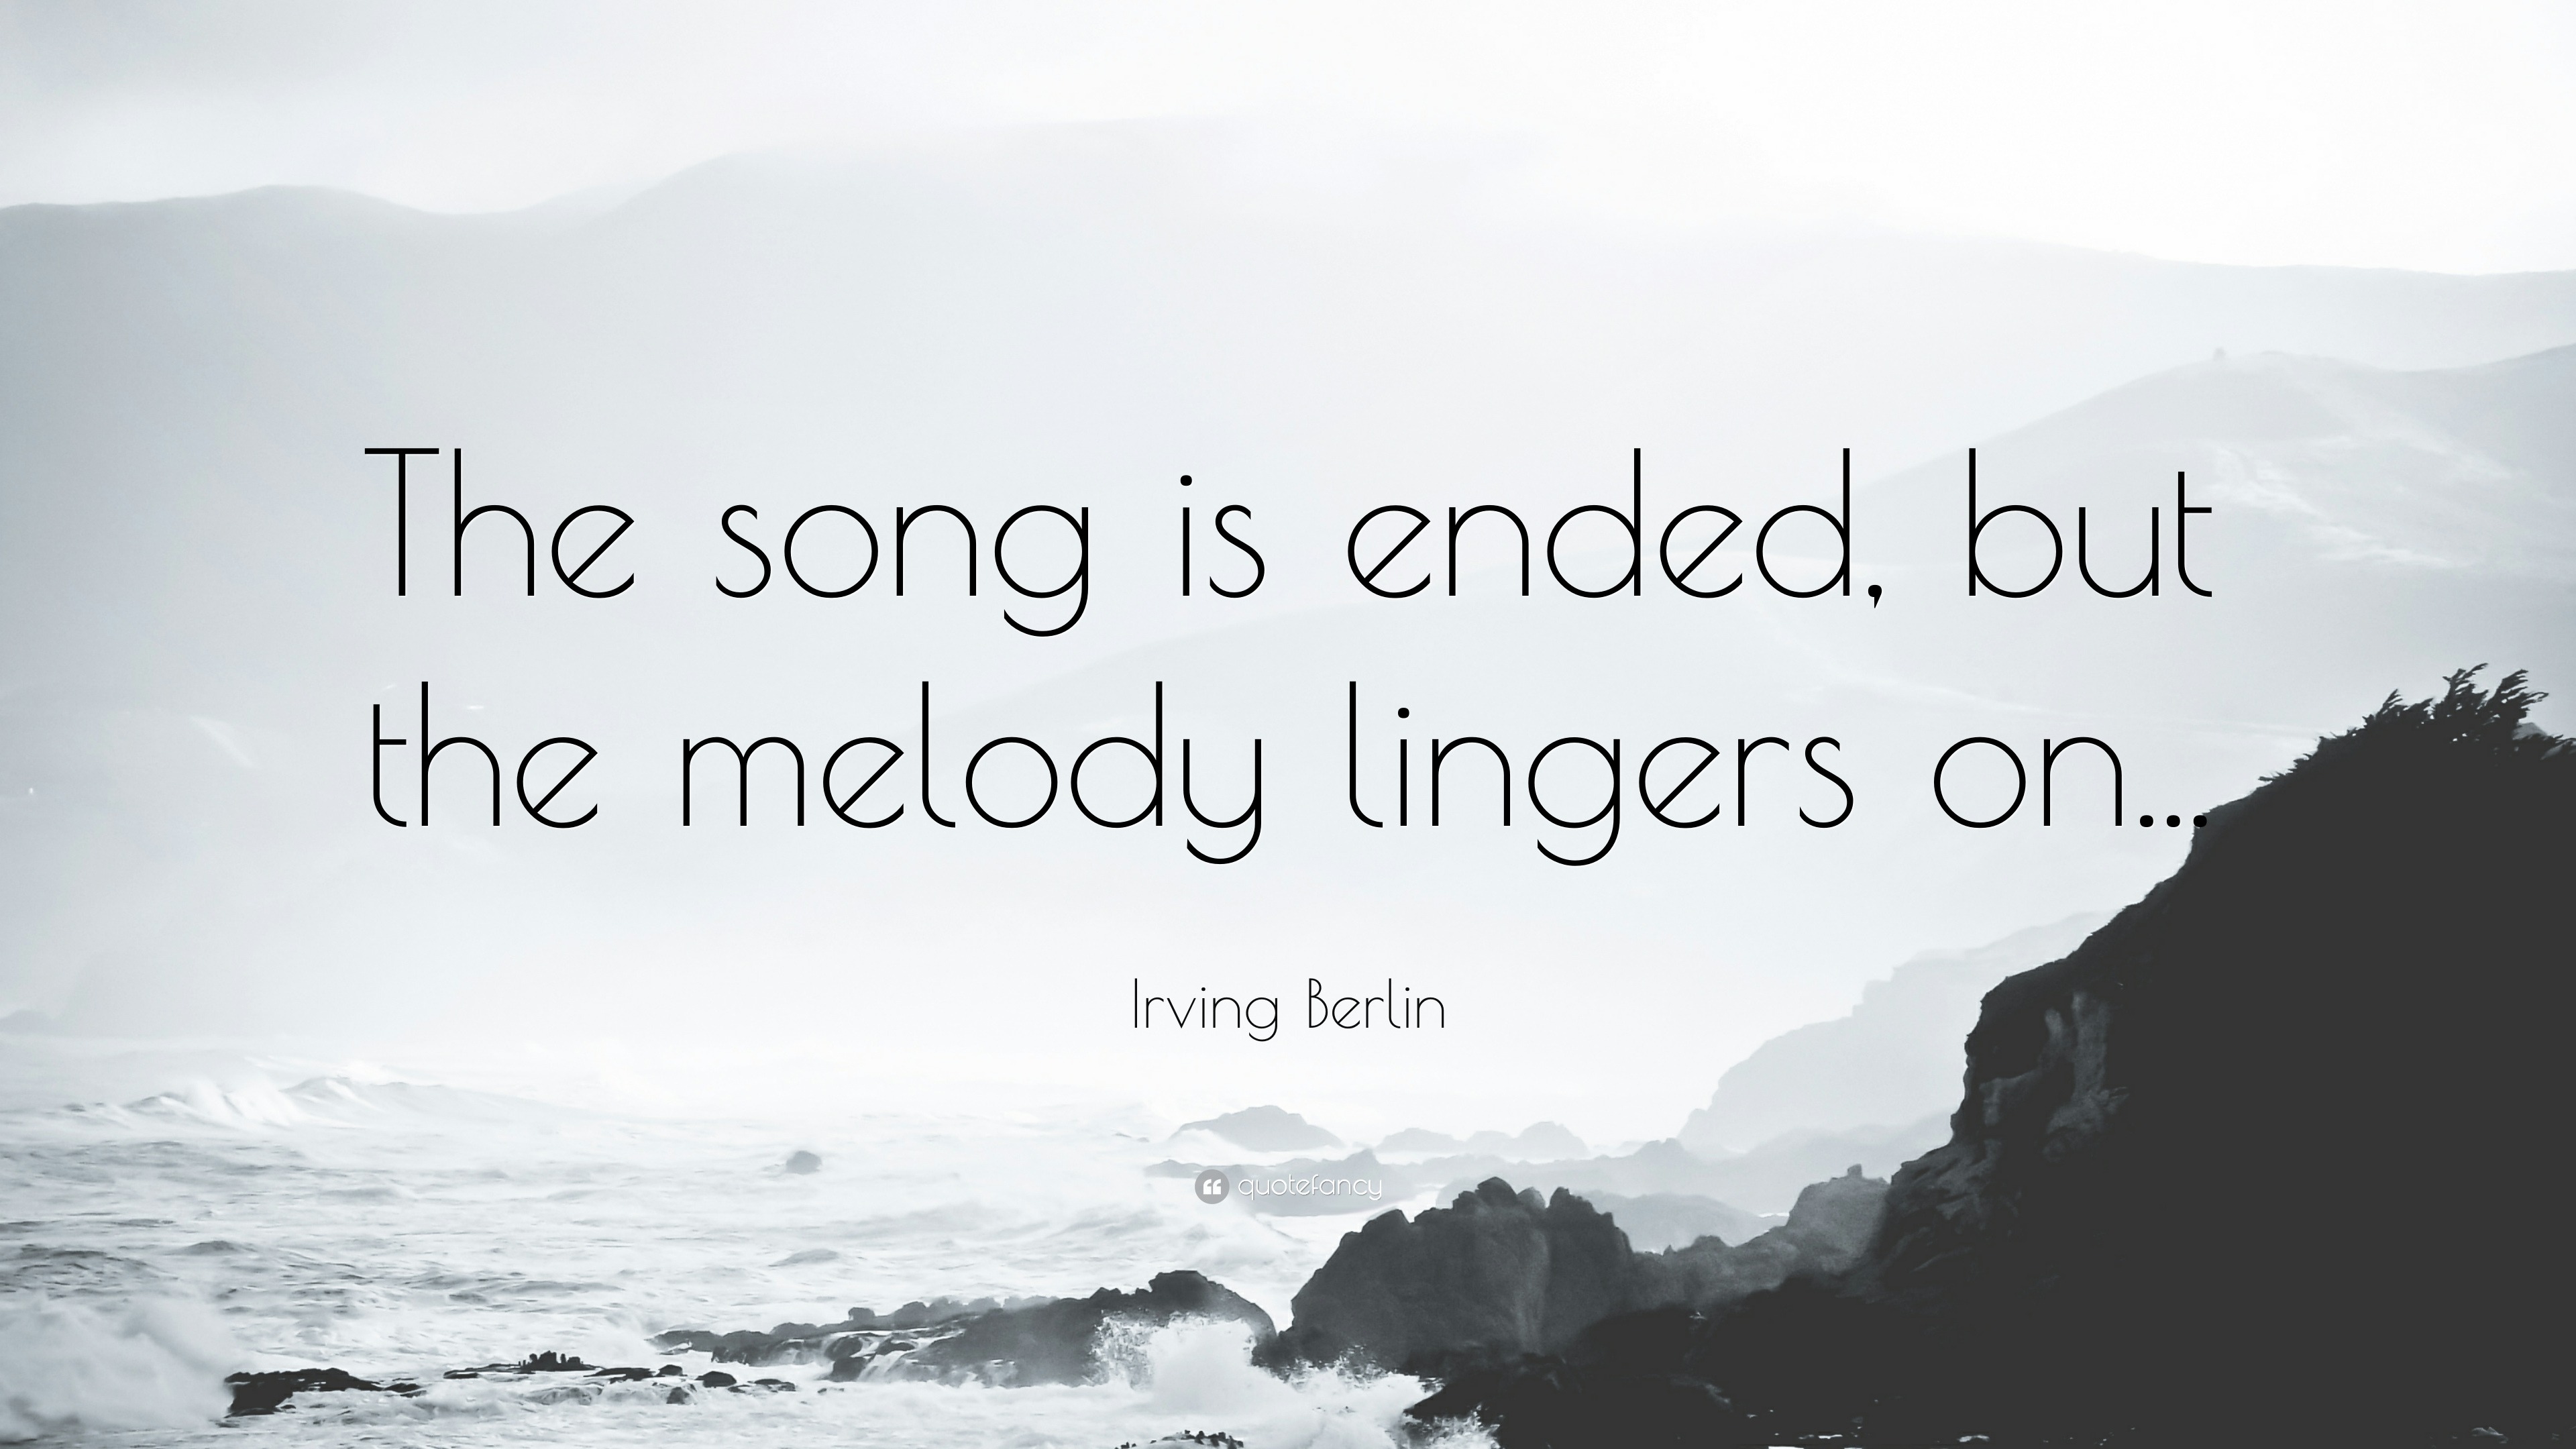 Irving Berlin Quote: “The song is ended, but the melody lingers on